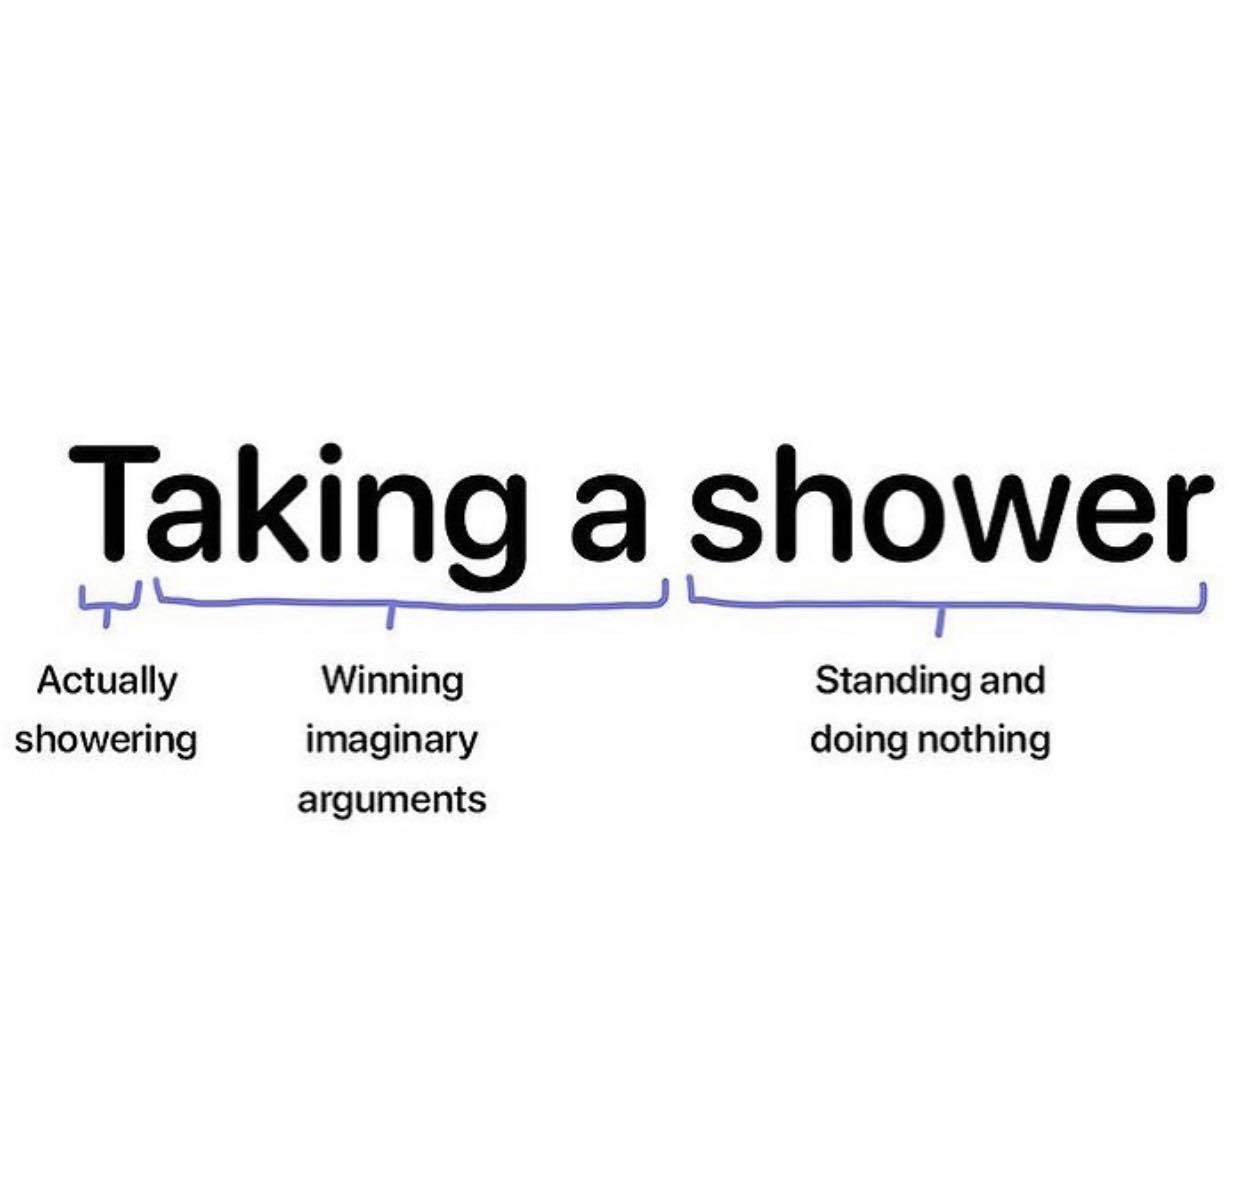 crazy realizations - Taking a shower Actually showering Winning imaginary arguments Standing and doing nothing